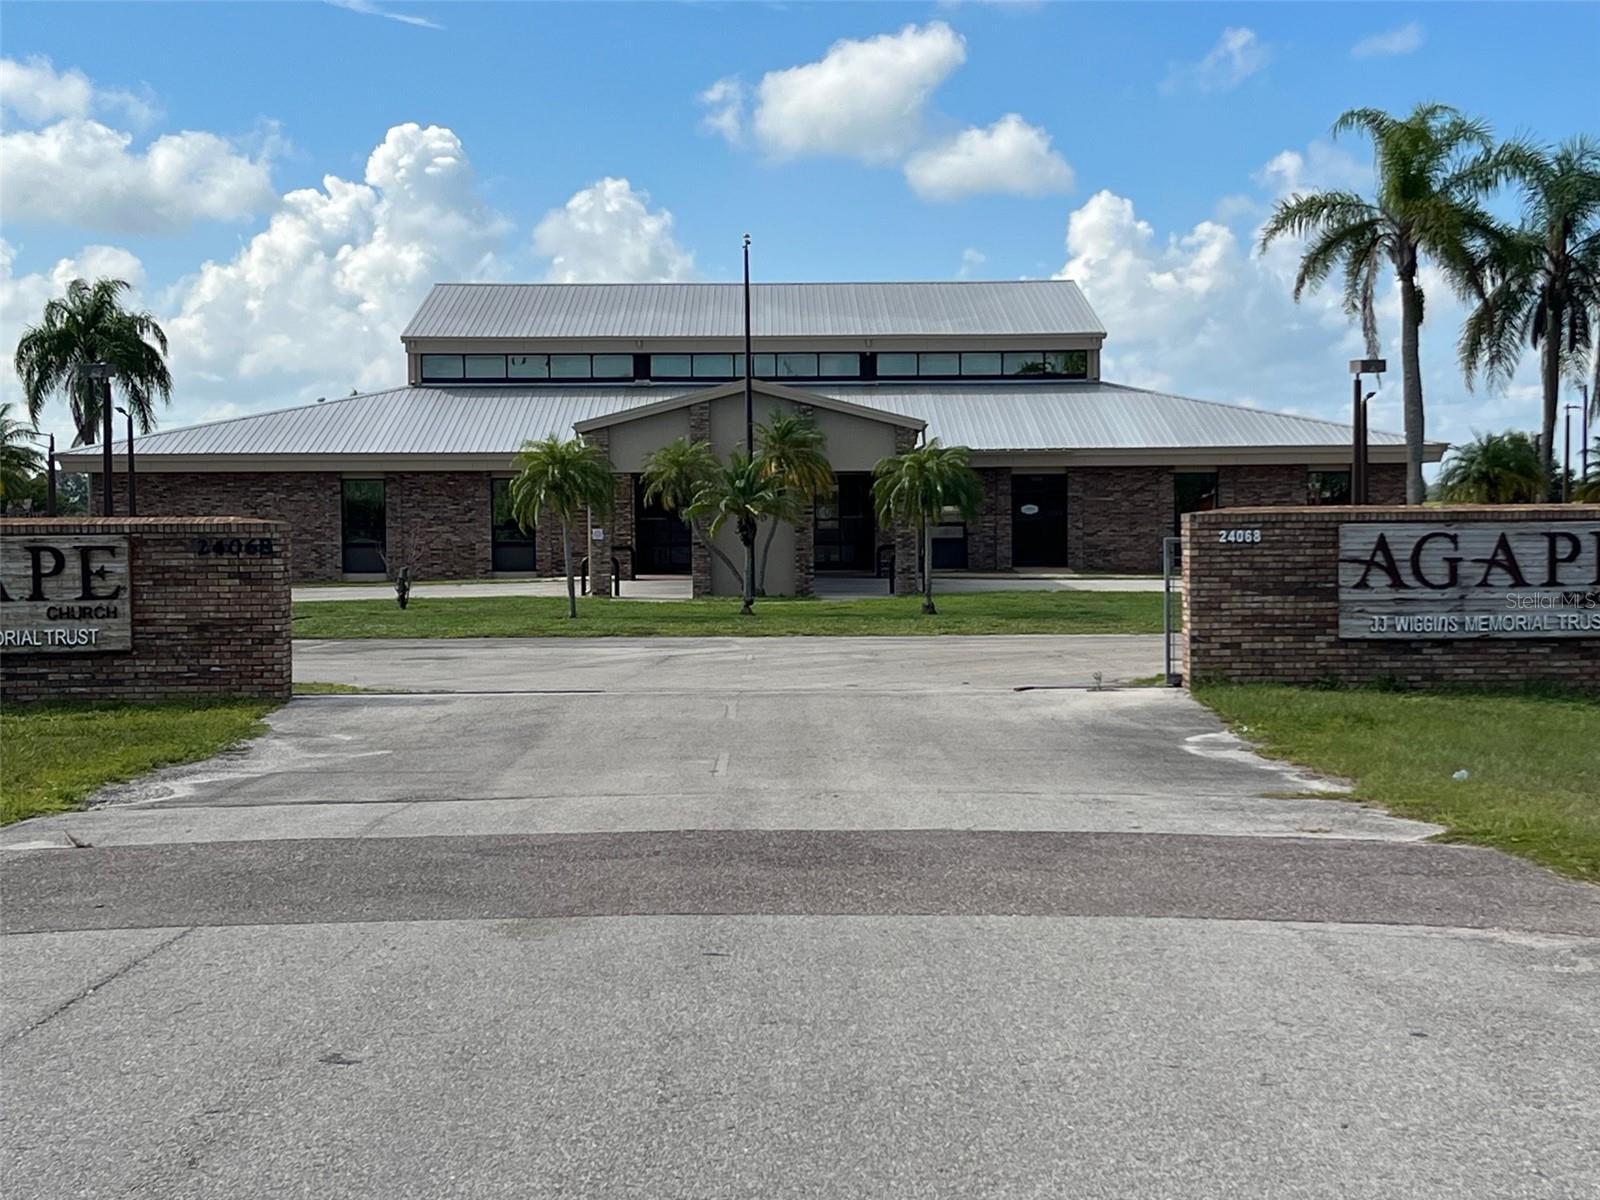 Church Building For Sale In Moore Haven, FL - 20,000+ Sq Ft